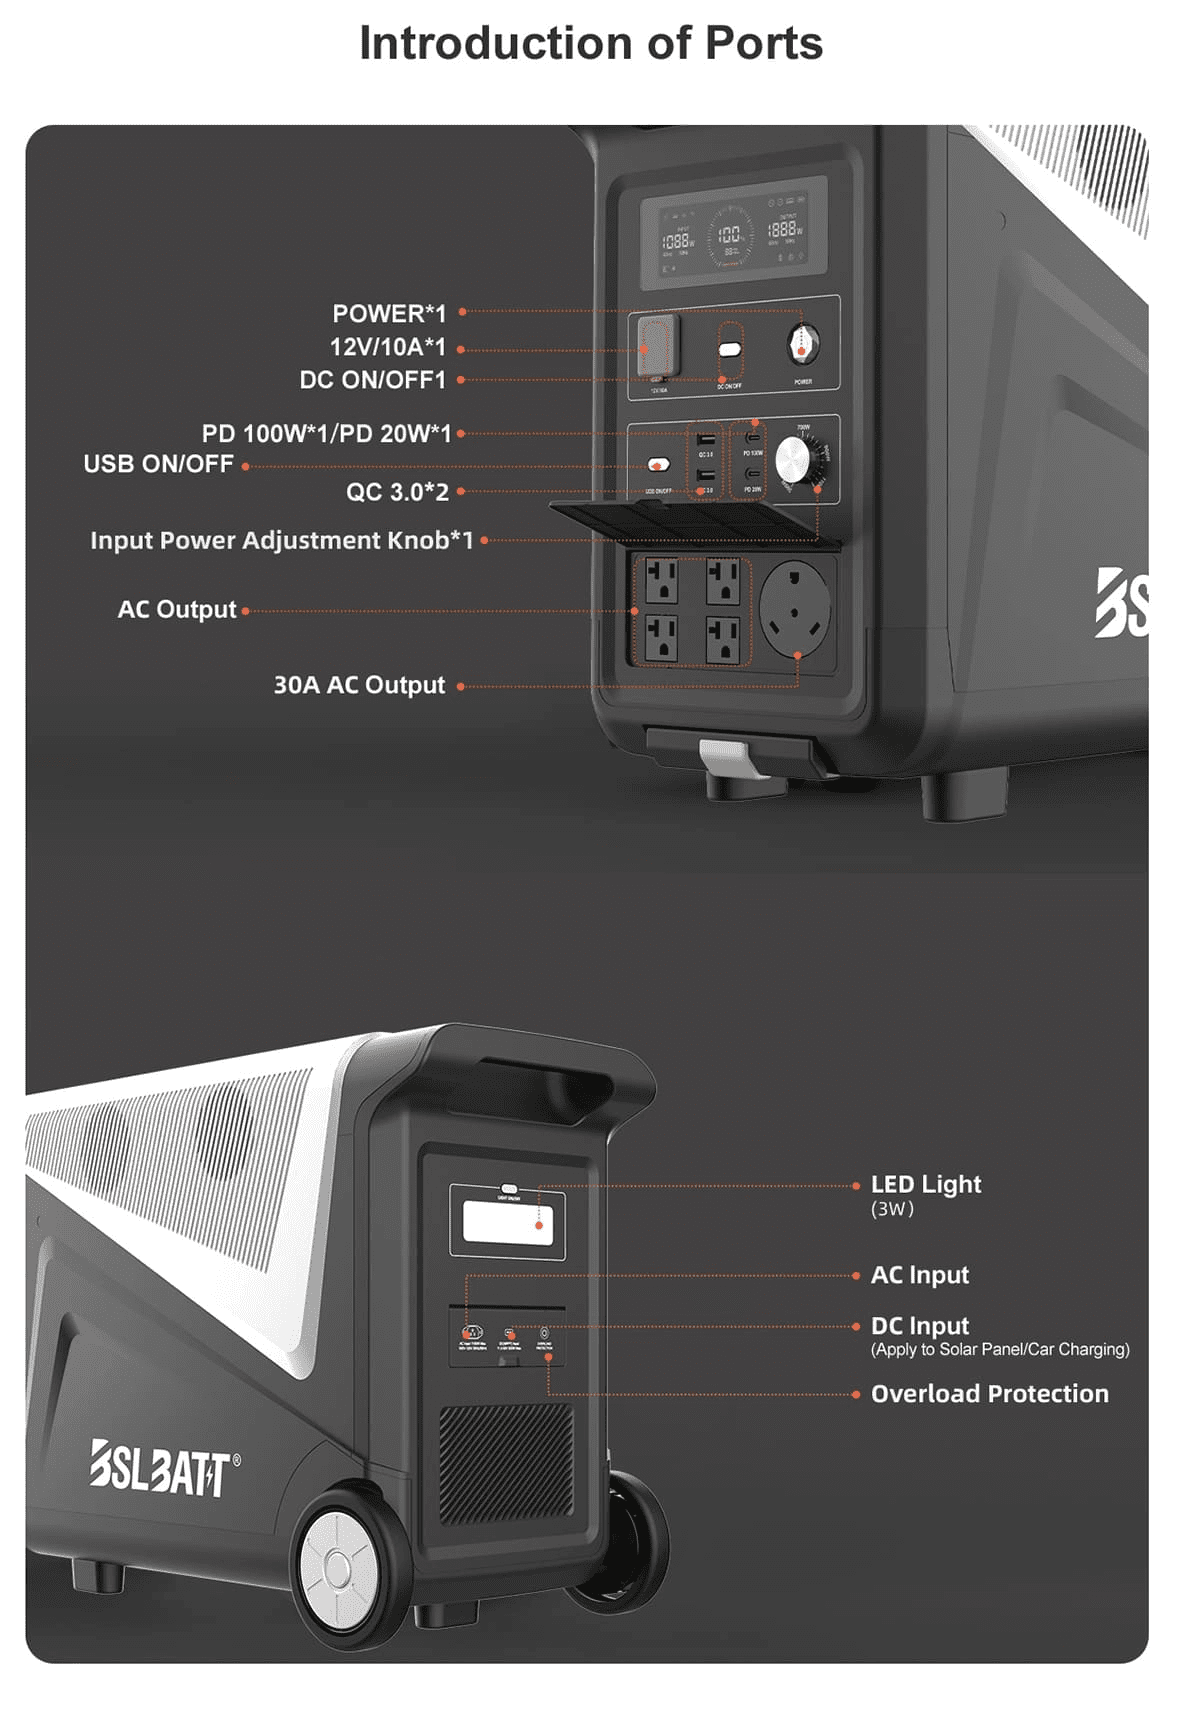 Product details of camping mobile power supply